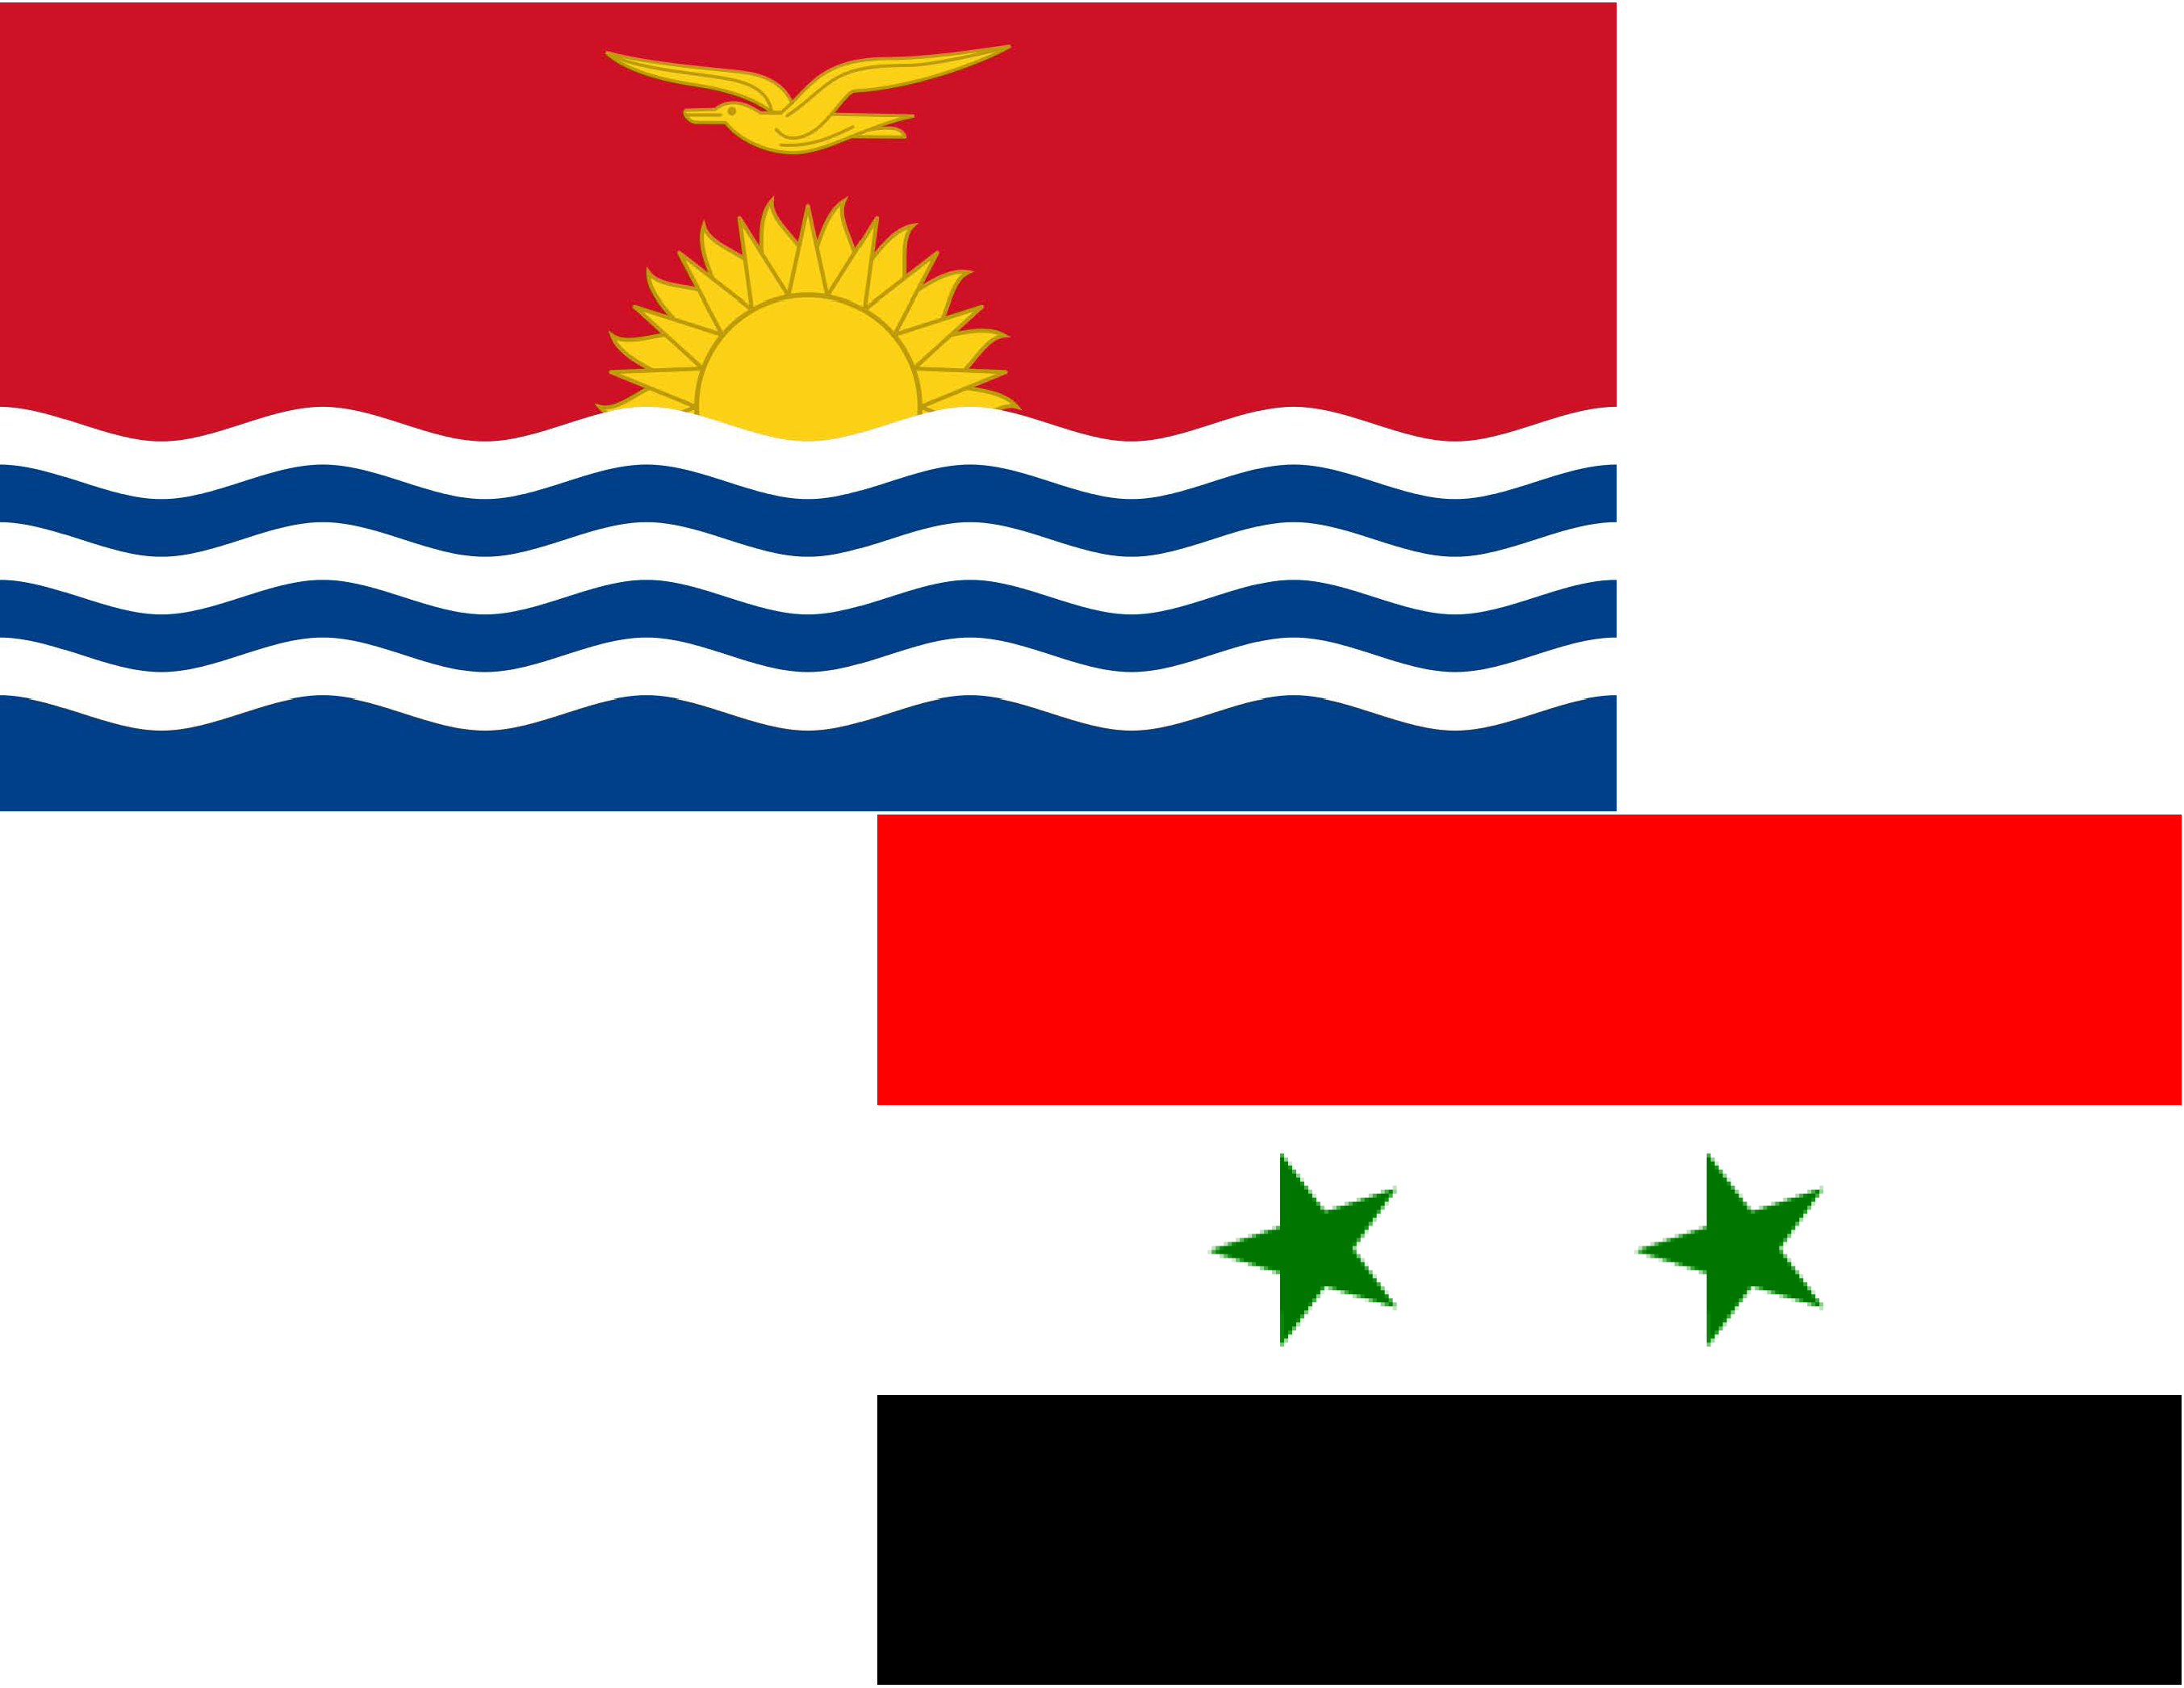 Kiribati and Syrian Arab Republic become the 72nd and 73rd future Parties to the Minamata Convention